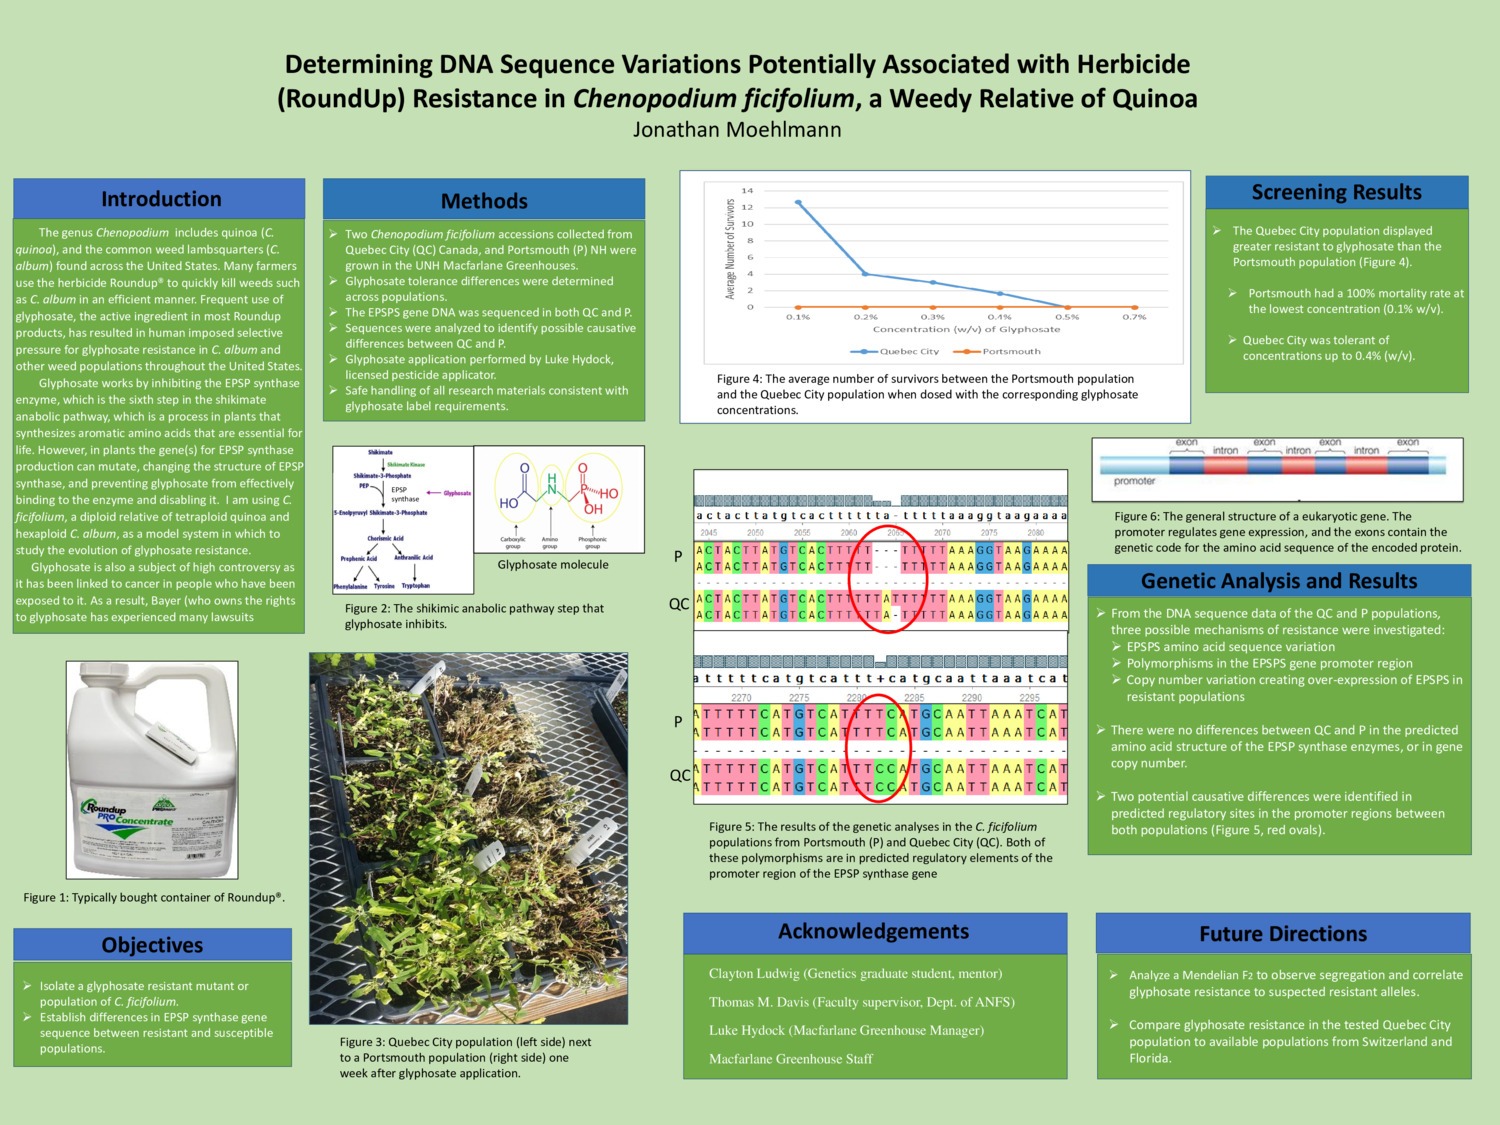 Determining Dna Sequence Variations Potentially Associated With Herbicide  (Roundup) Resistance In Chenopodium Ficifolium, A Weedy Relative Of Quinoa by jwm1060